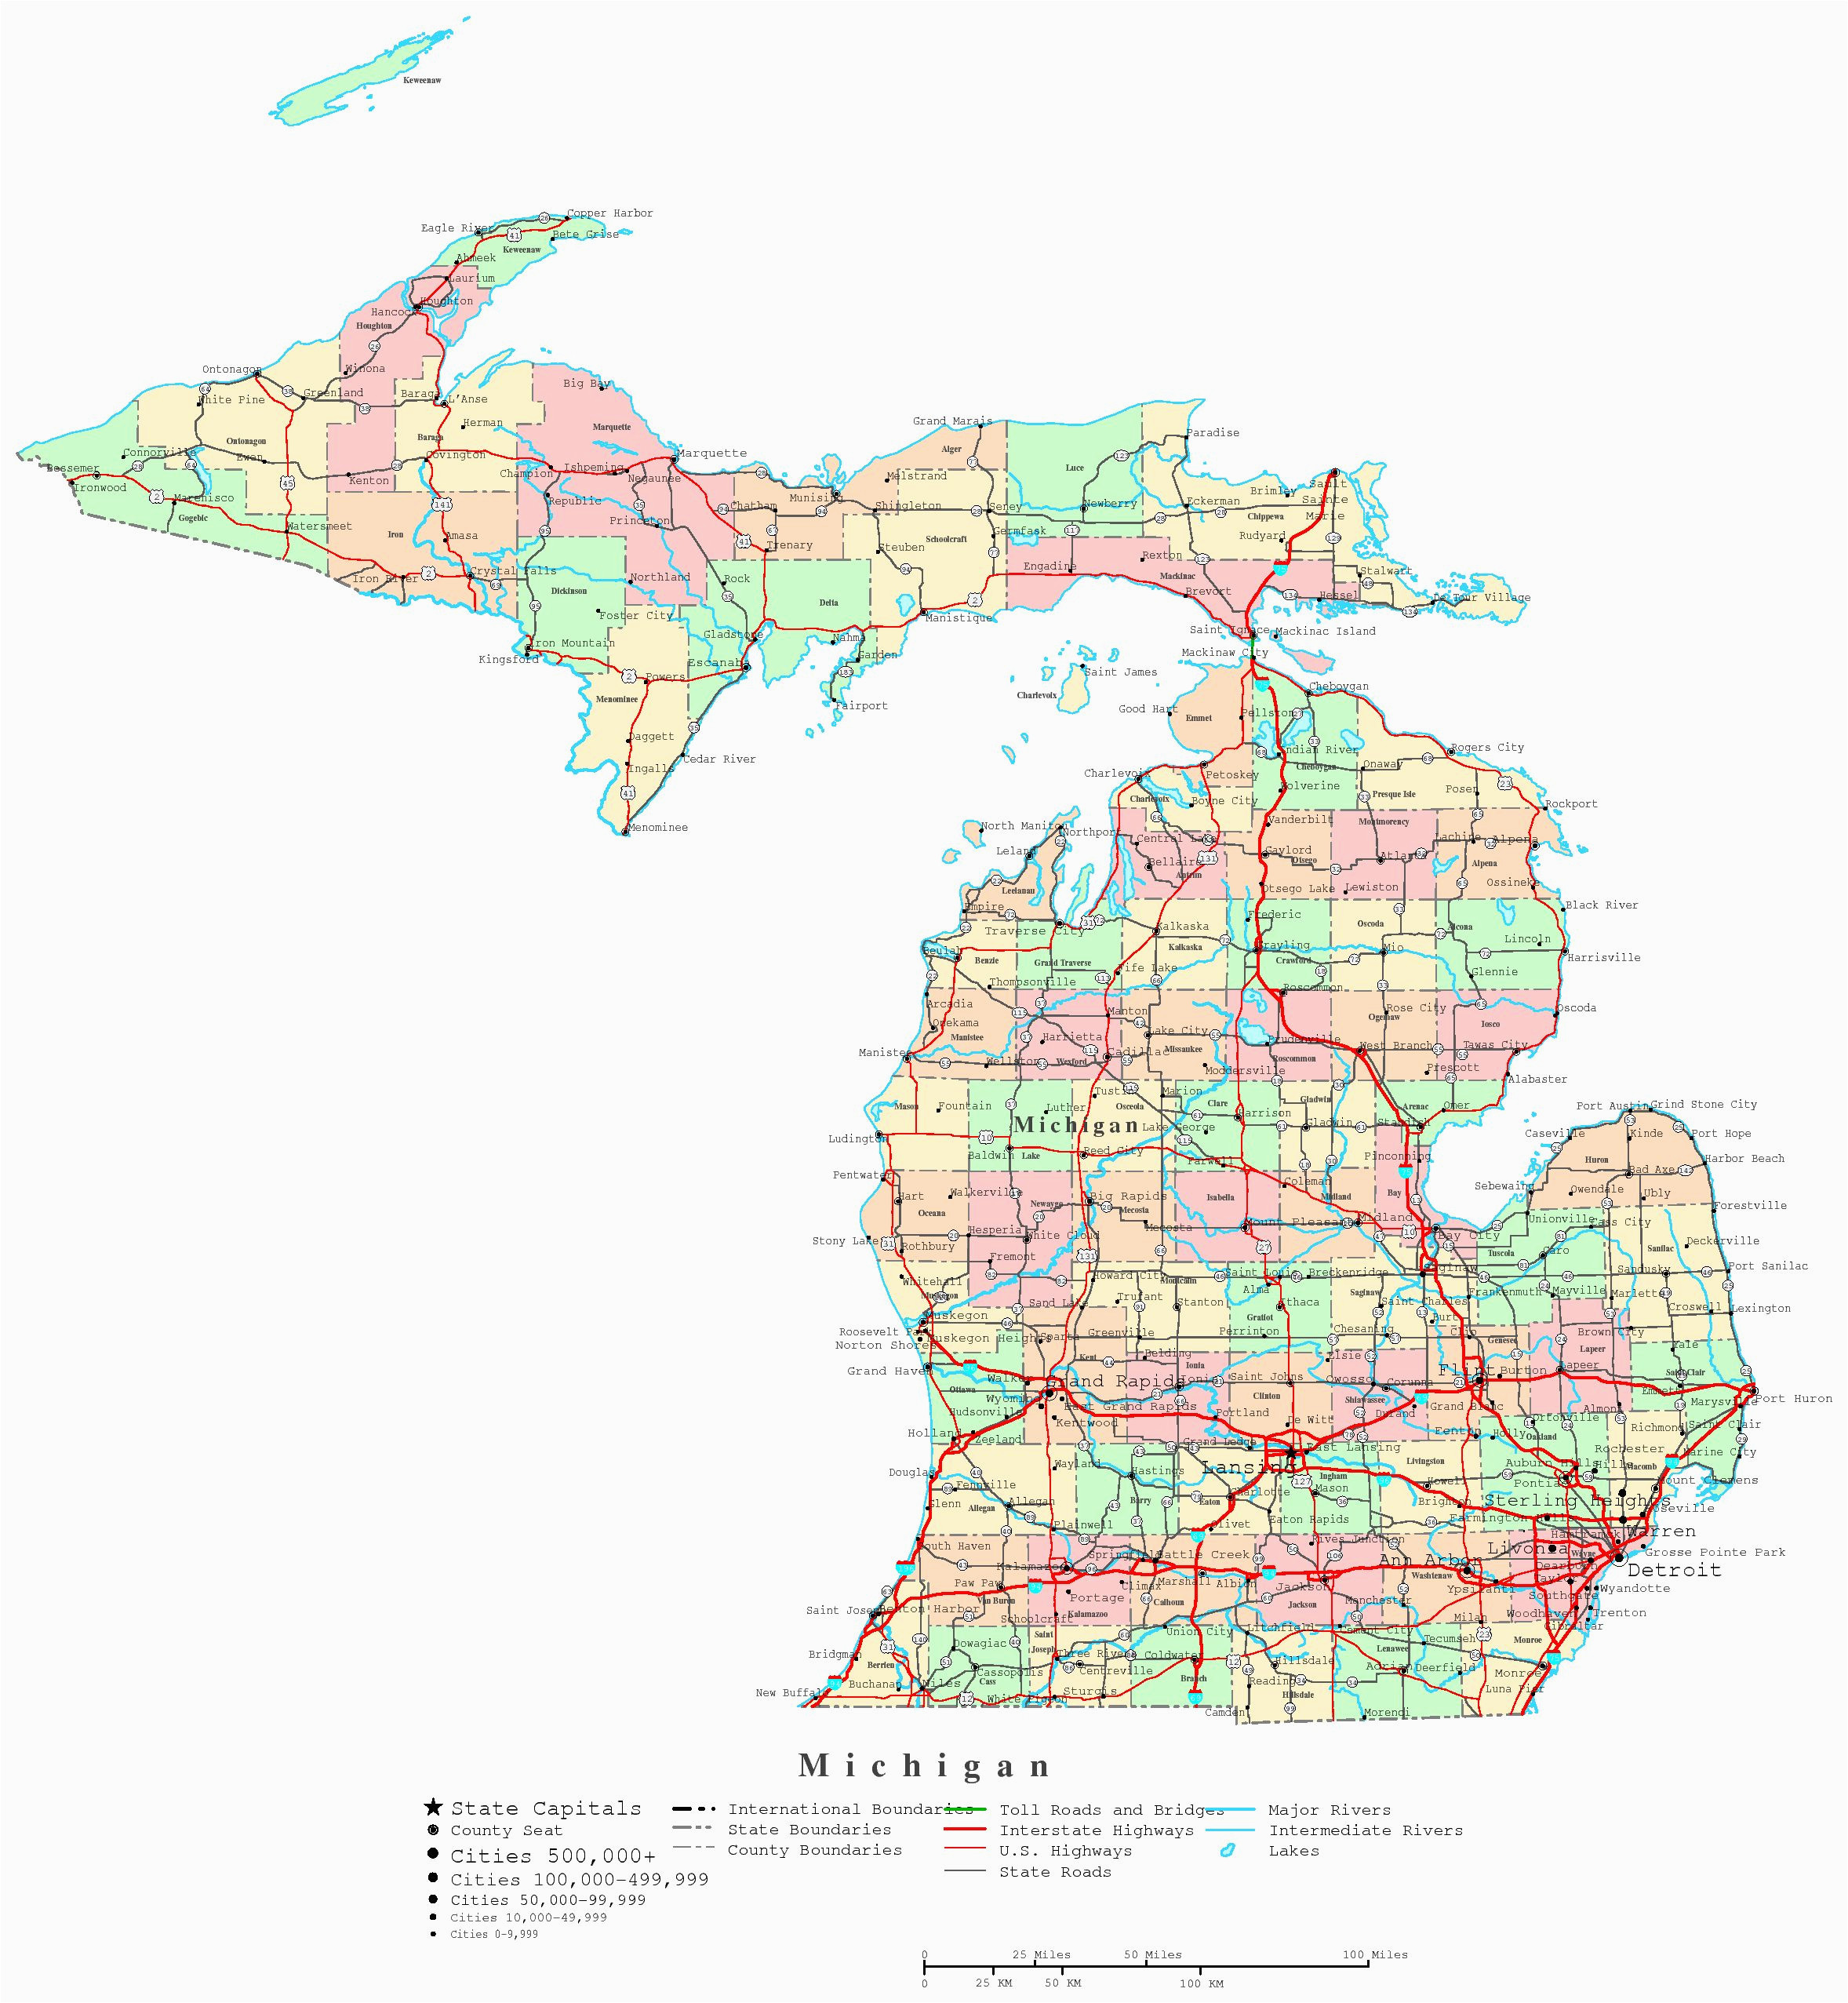 Map Of Michigan Upper Peninsula Cities Michigan Map with Cities and Counties Maps Directions